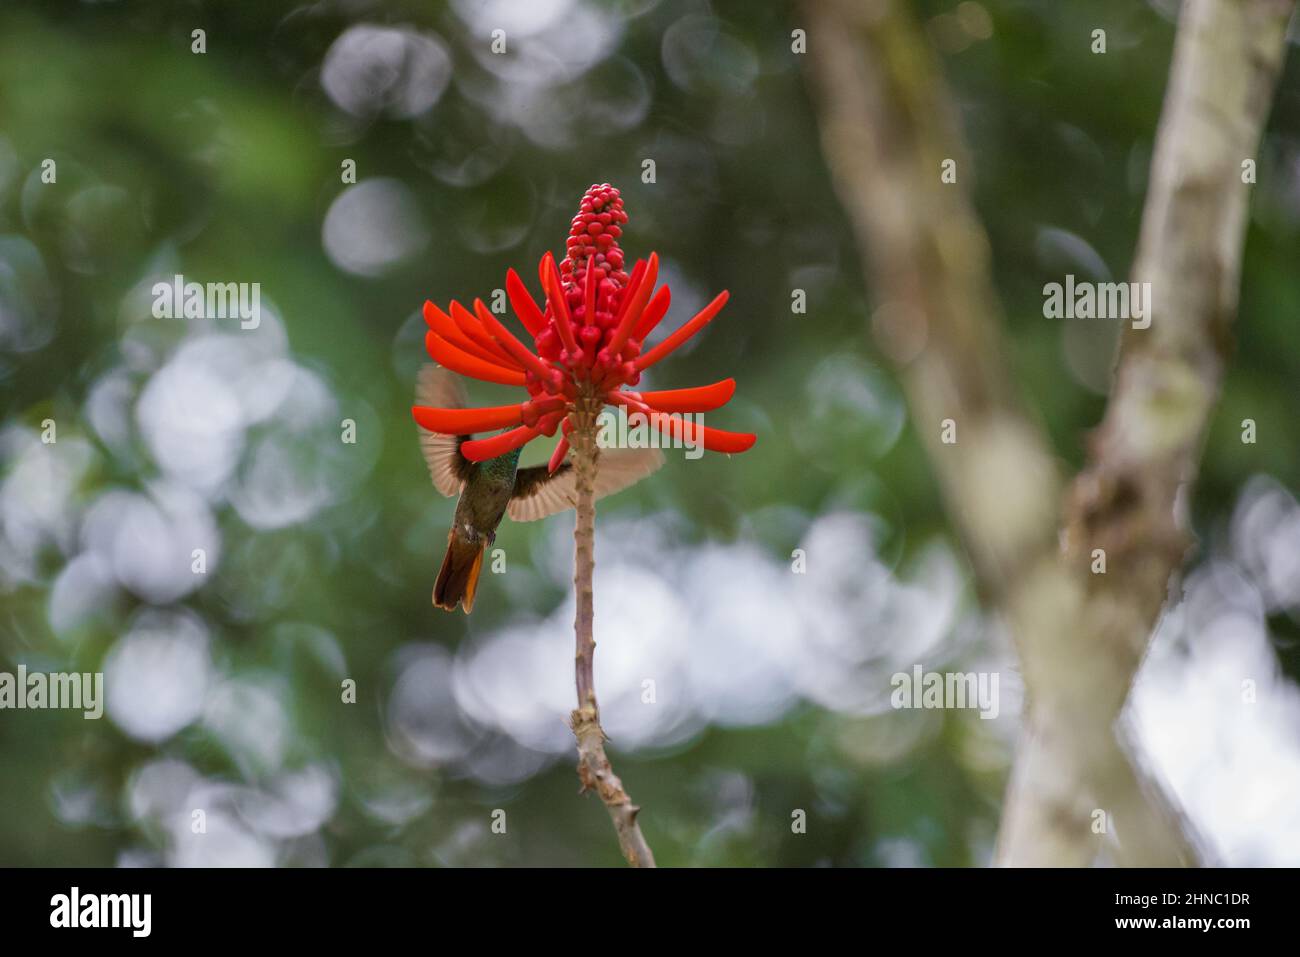 Closeup of a Colibri and the Erythrina coral against the blurred background of the tree branches Stock Photo